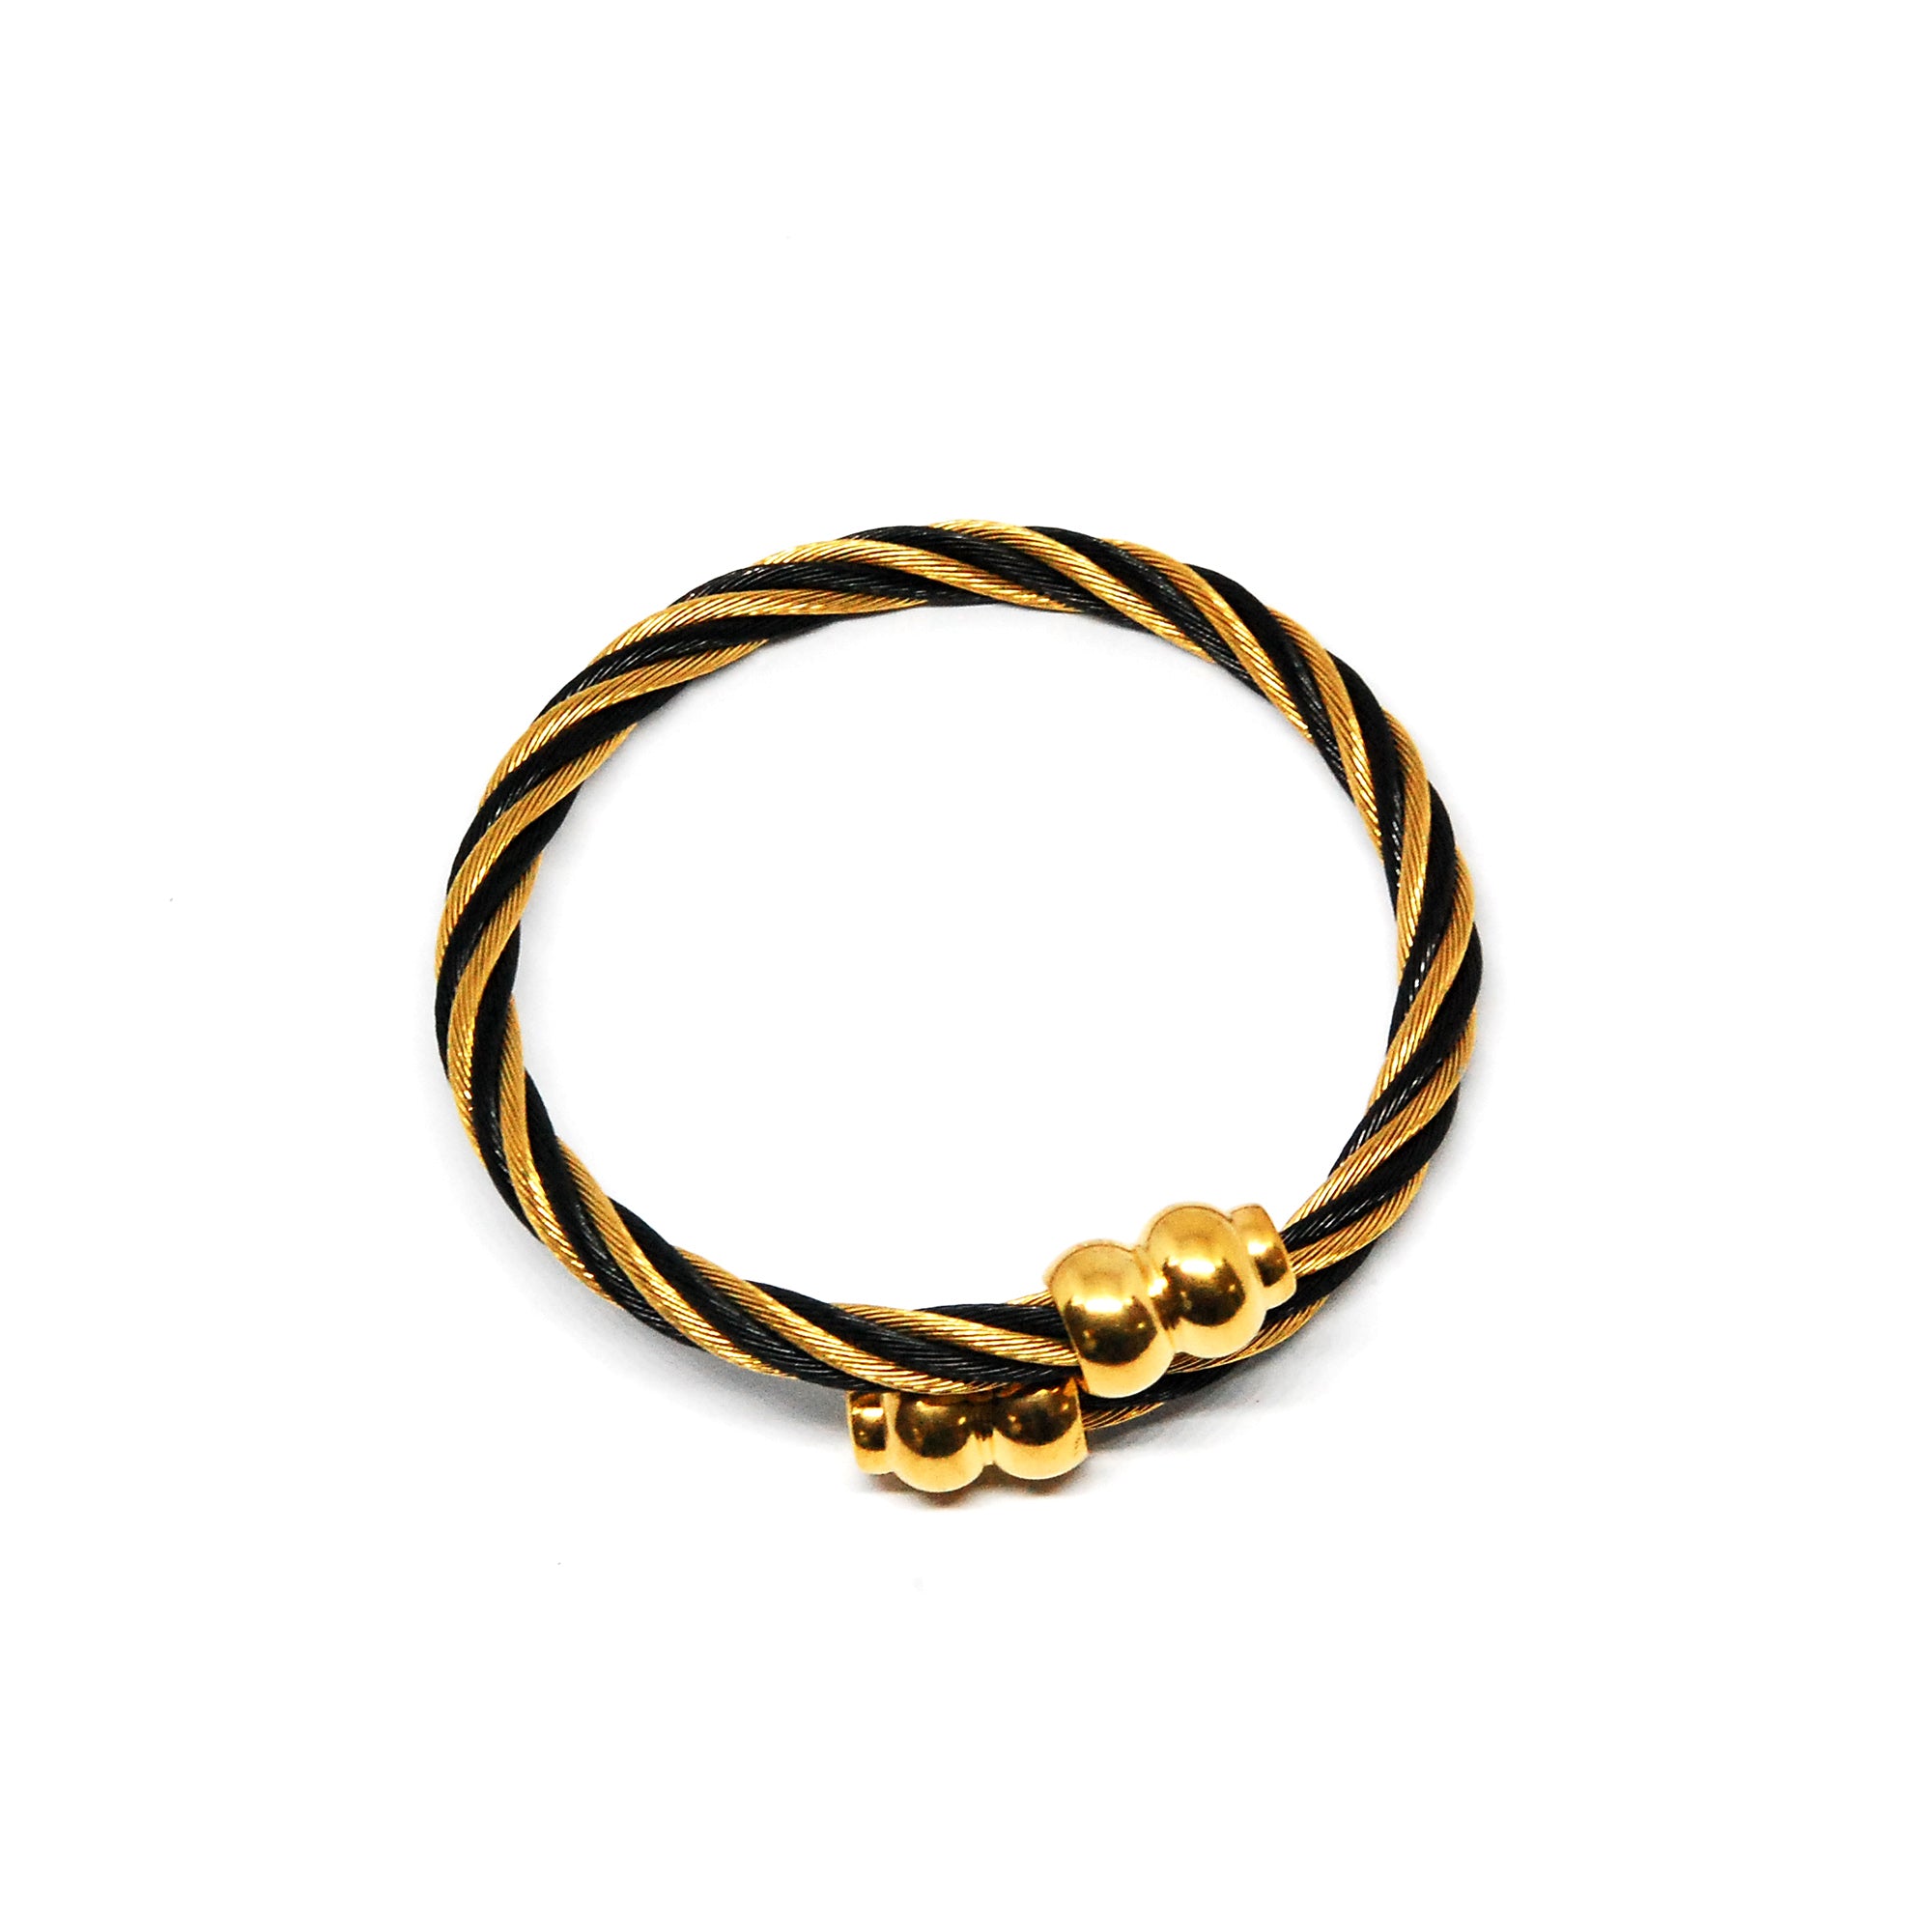 ESBG 6719: 2-Tone Twisted Bangle w/ Gold-Plated Celtic Torc Ends (Black & Yellow Gold)